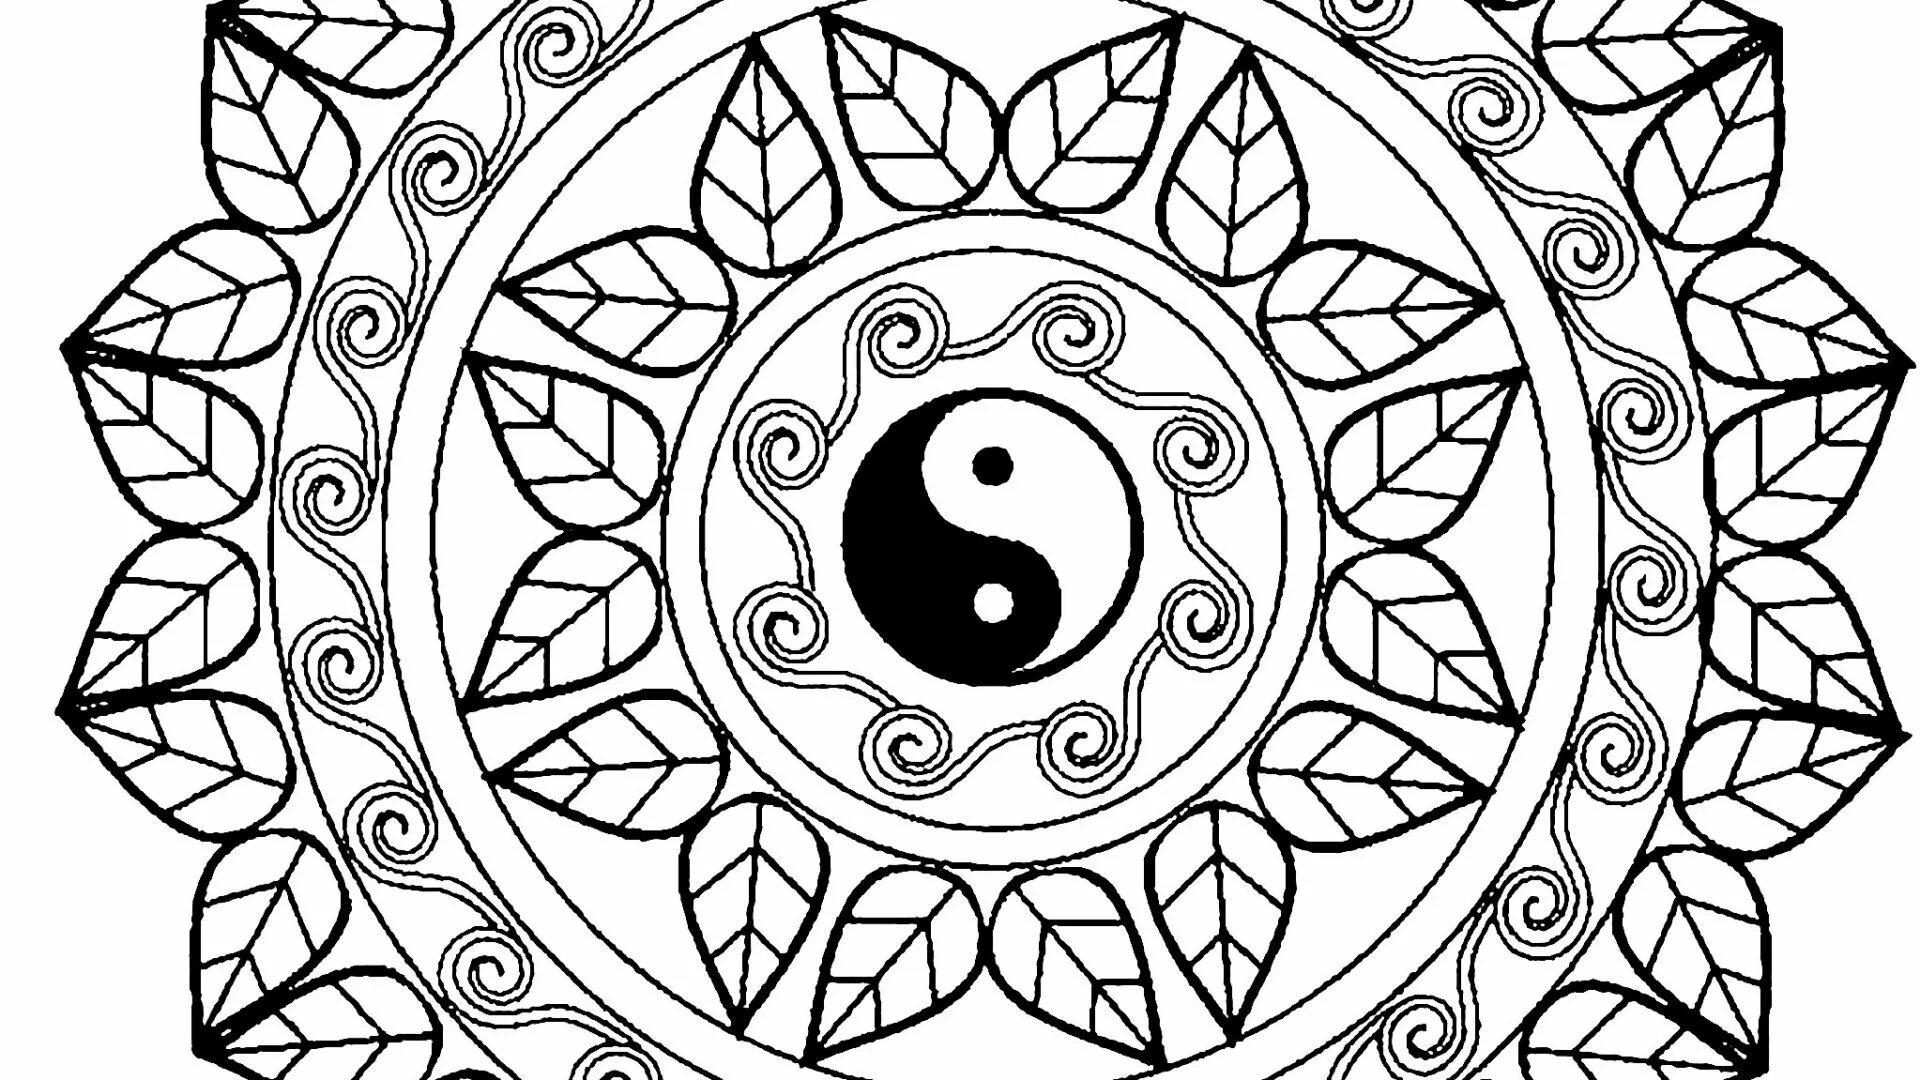 Meaning of the mandala splendorous coloring page